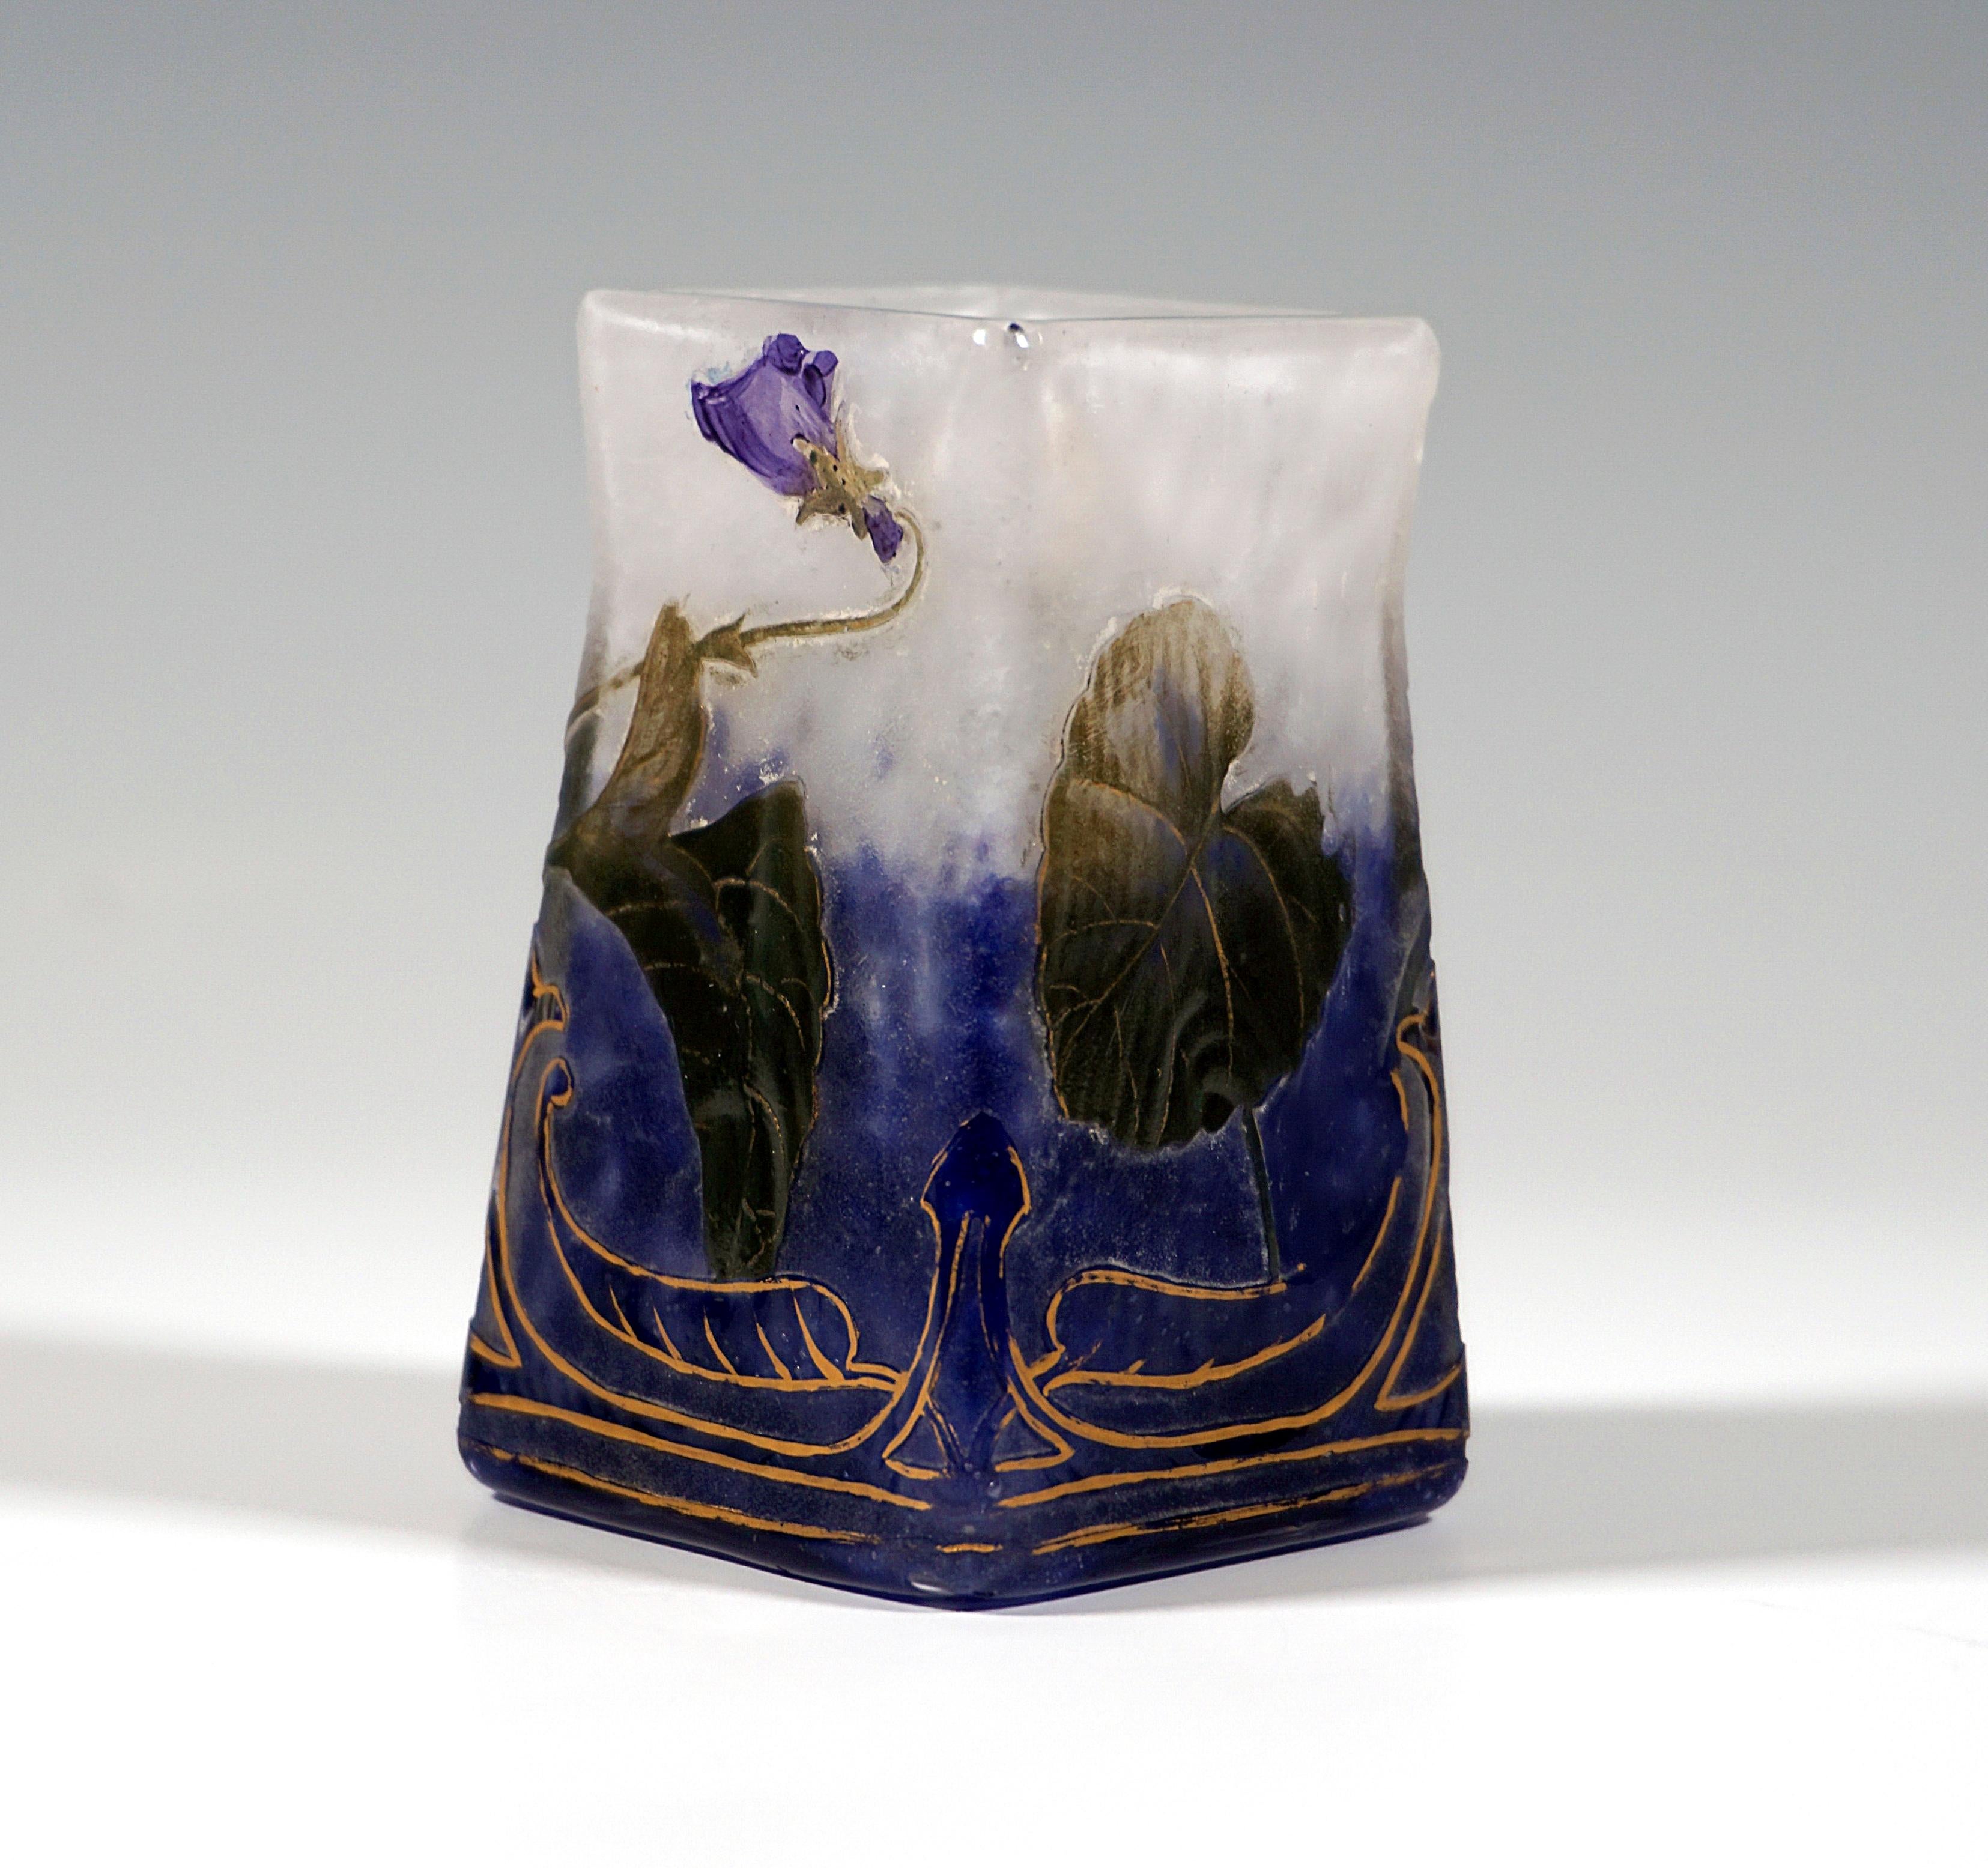 Exquisite French Art Nouveau glass craftsmanship:
Square vase on rhombic plan, colorless glass with flaky white, in stand area with cobalt blue powder fusions, etched and in colored enamel painted violet decor with gold hightening and gold